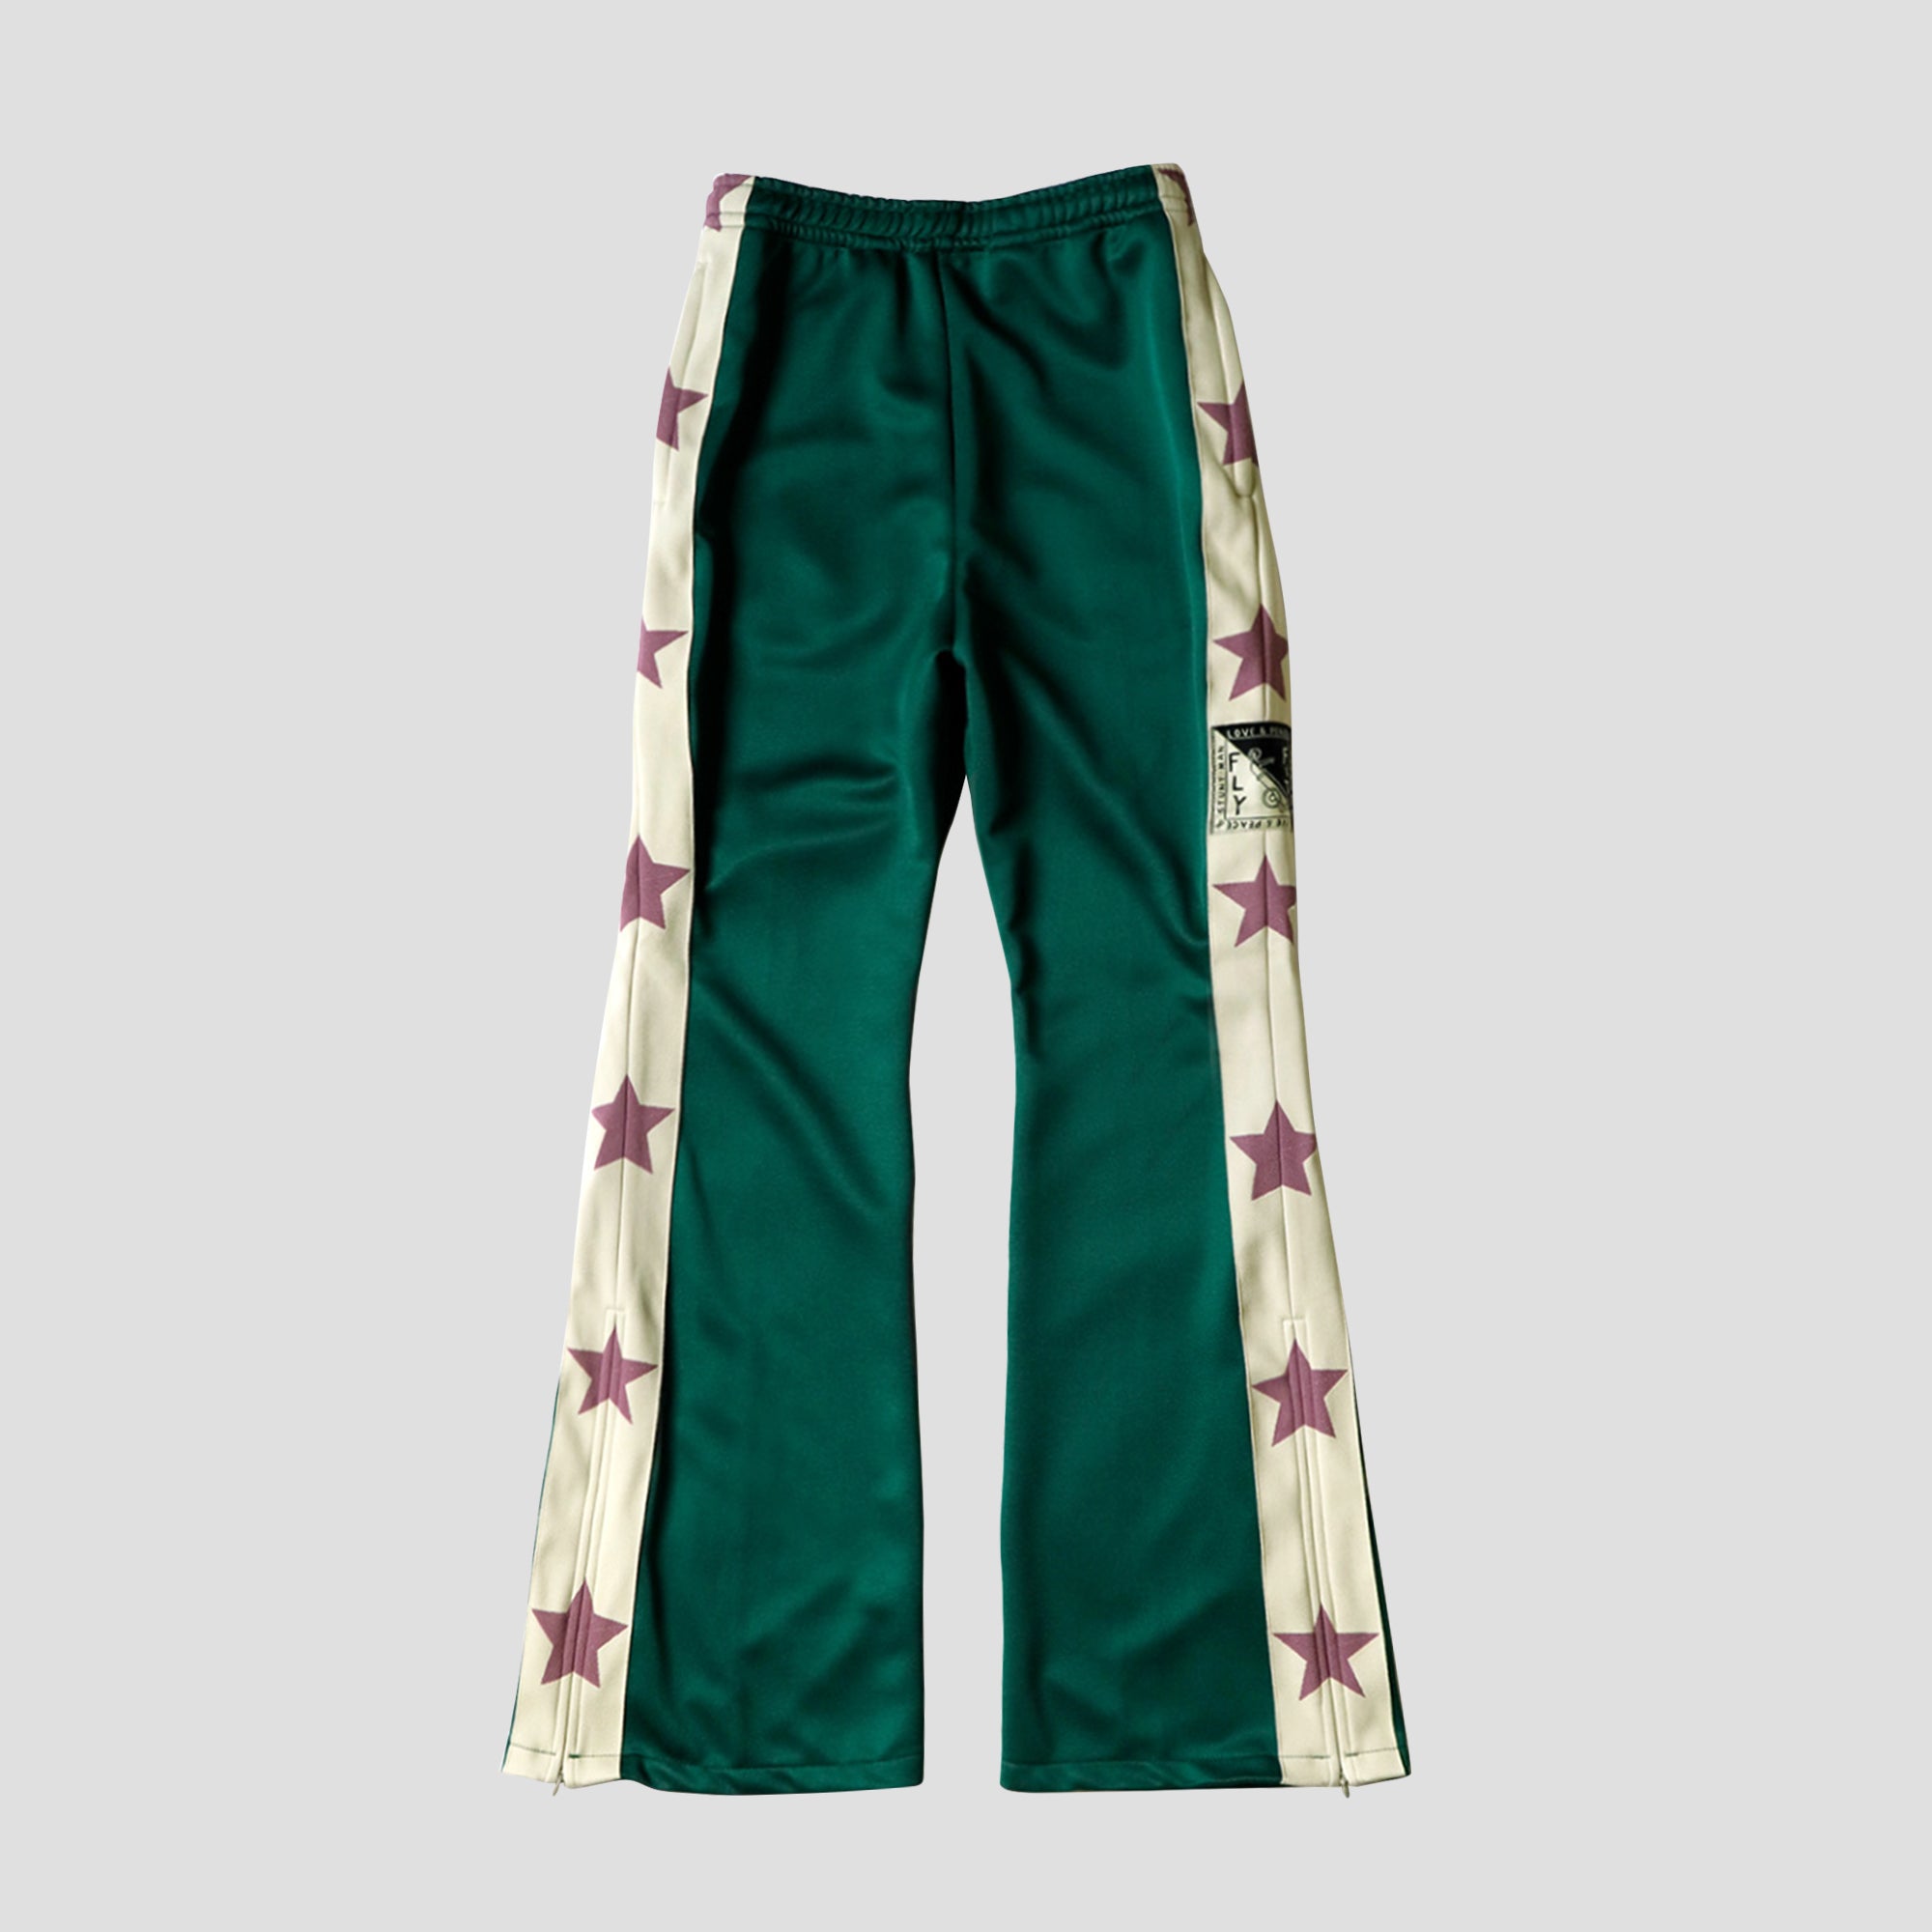 JERSEY FLARE TRACK PANTS - GREEN